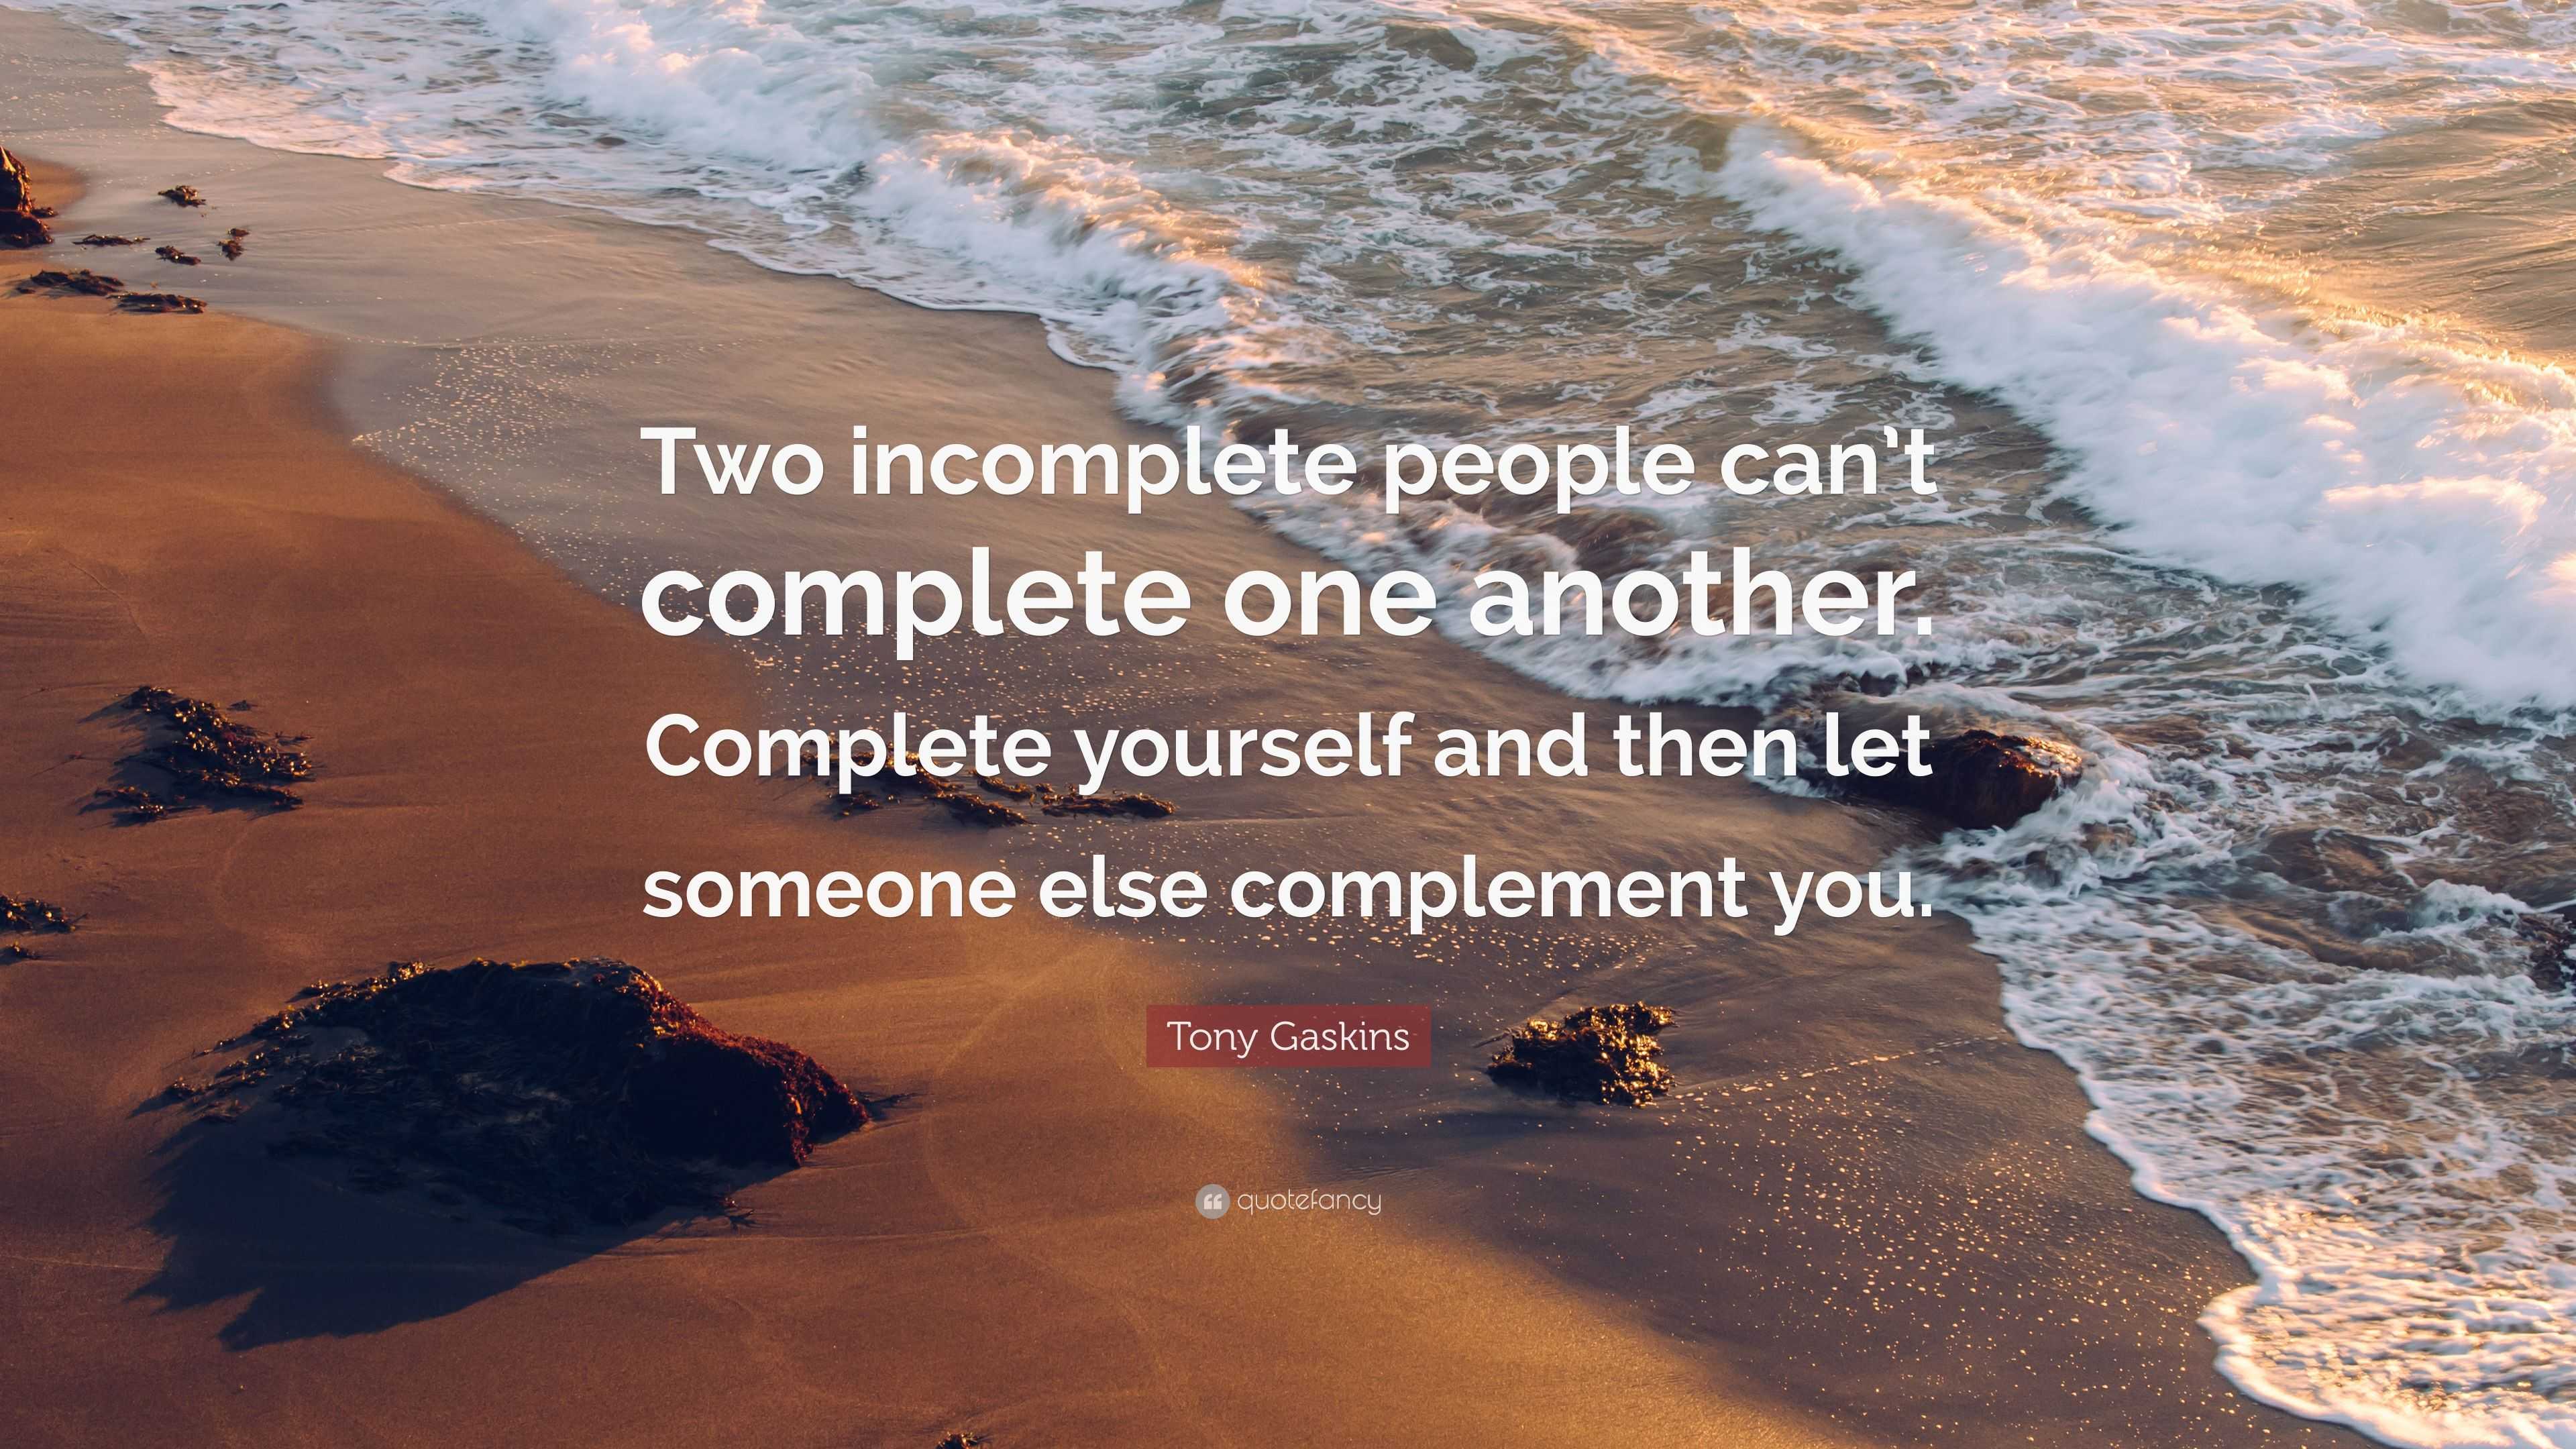 Tony Gaskins Quote: “Two incomplete people can’t complete one another ...